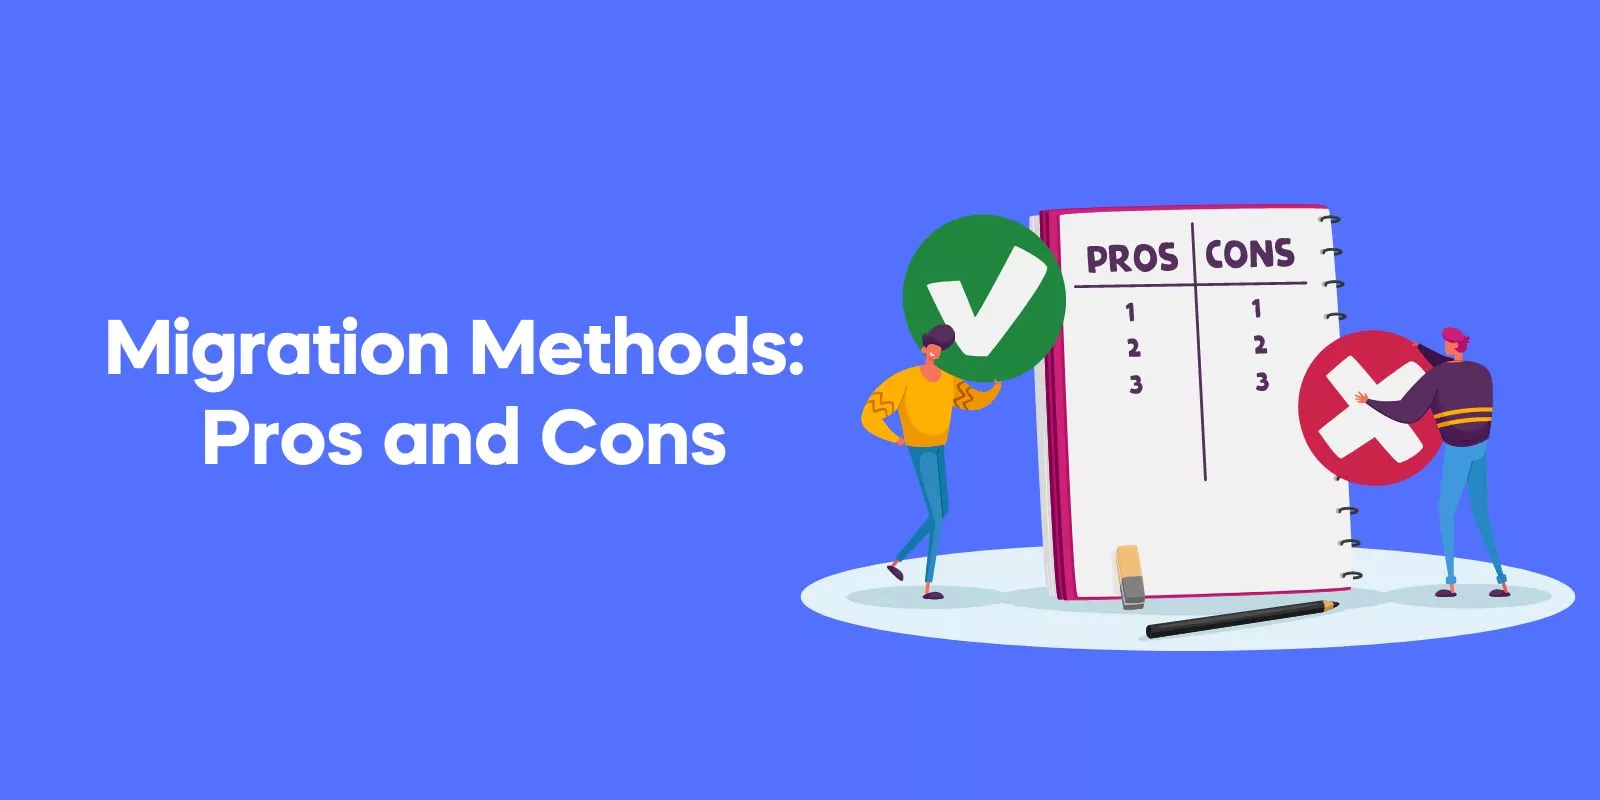 Migration Methods: Pros and Cons